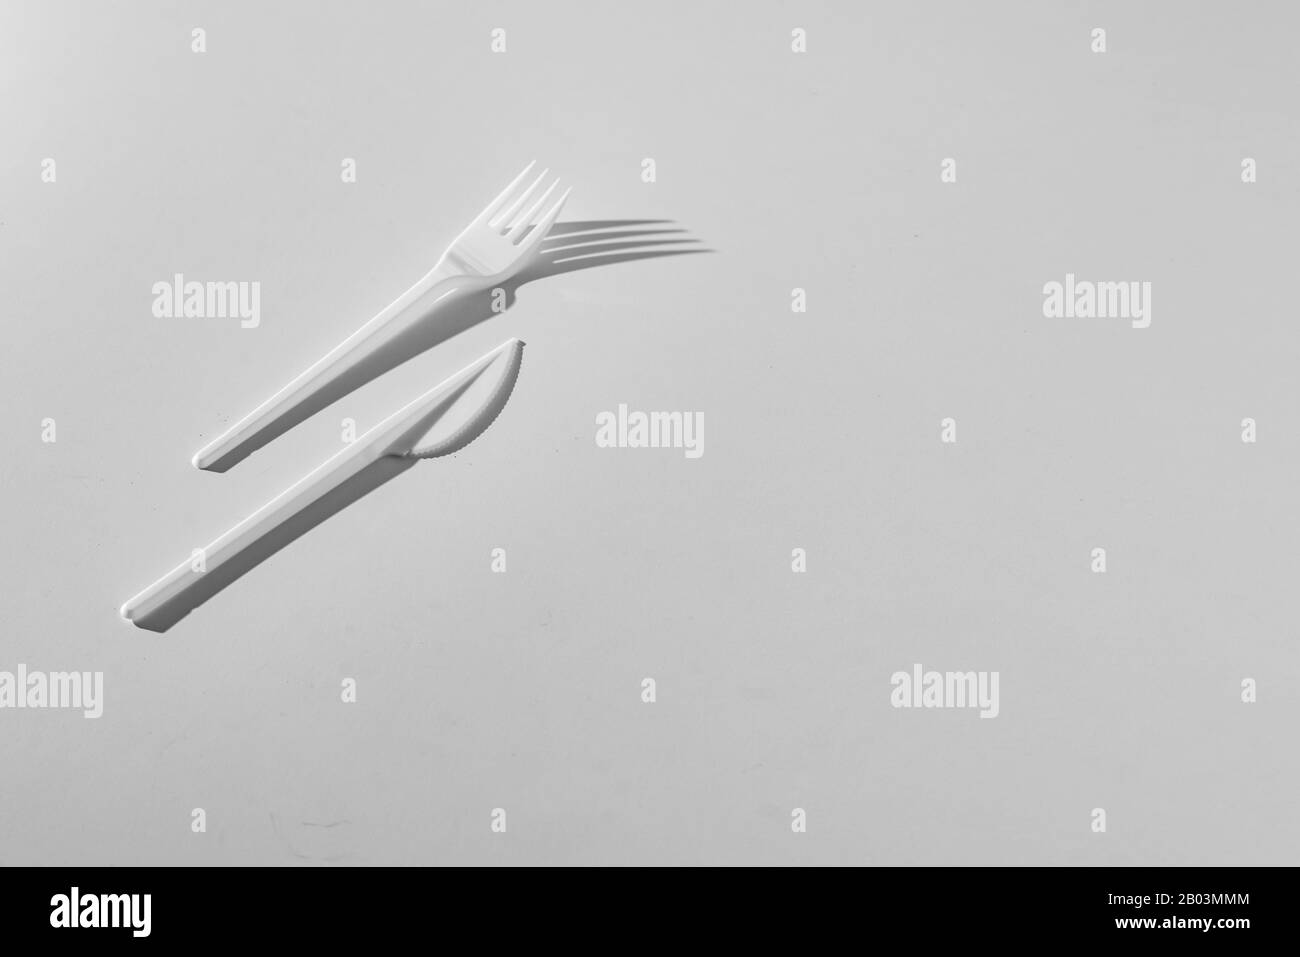 a top view conceptual minimalism with plastic table utensil tablewear cultery Stock Photo